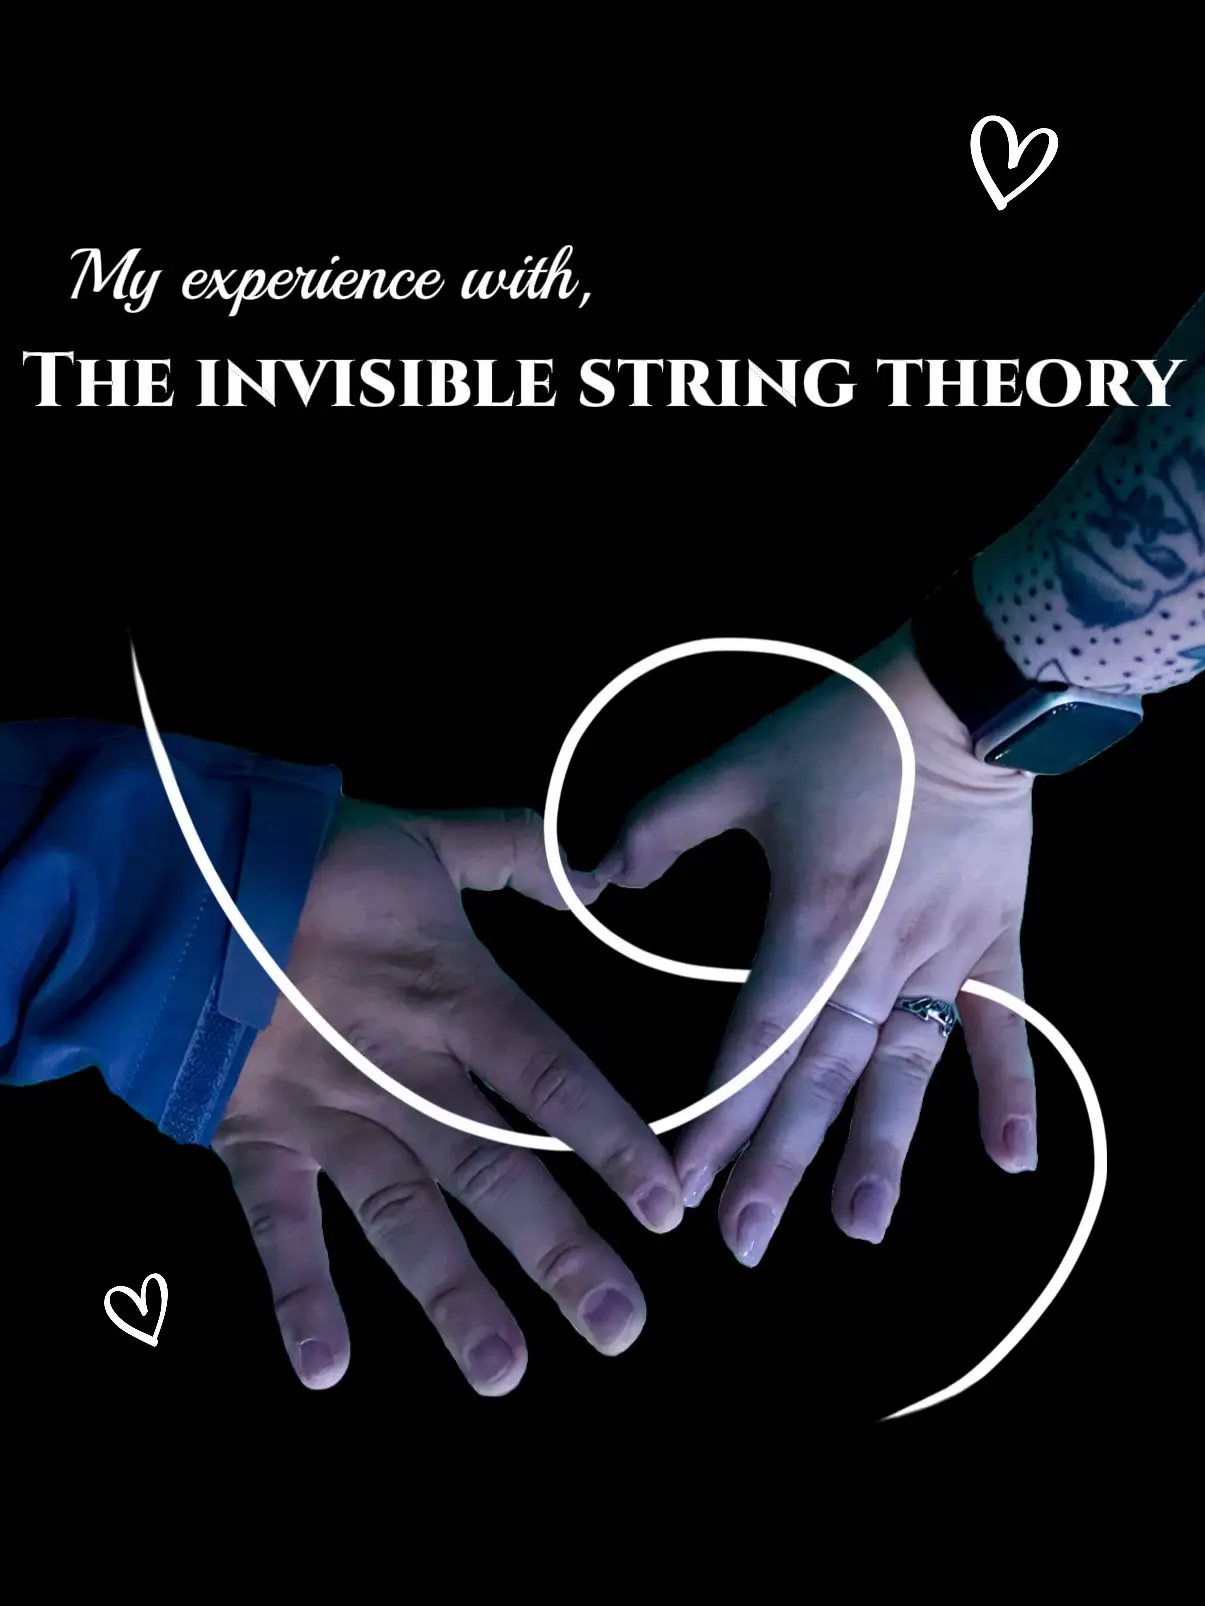 Invisible String by Meg Jones